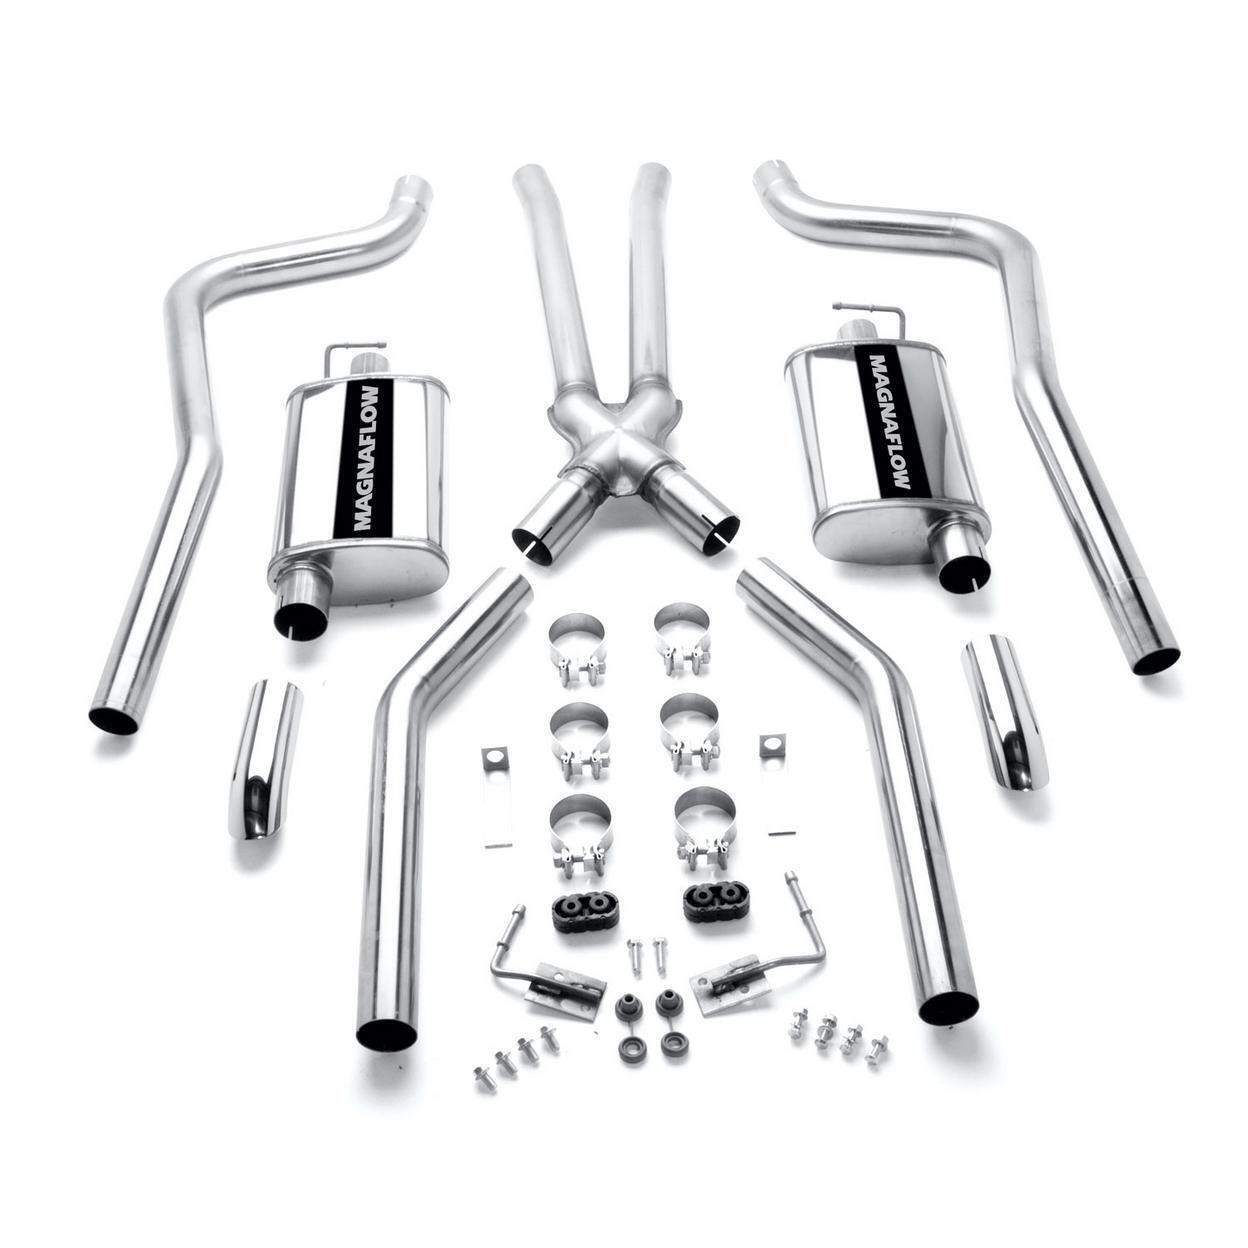 Exhaust System Kit for 1970 Plymouth Barracuda 5.6L V8 GAS OHV